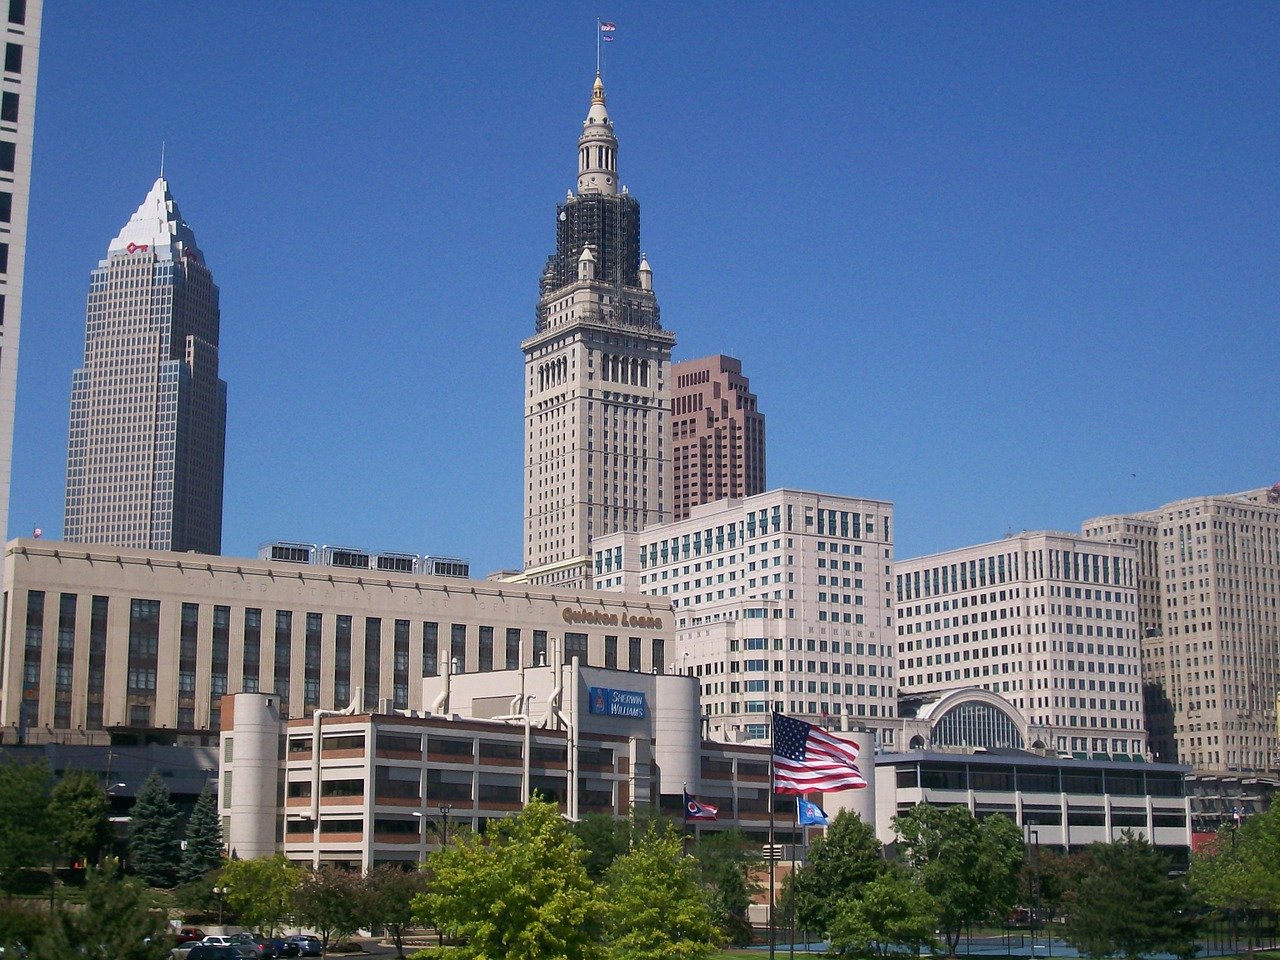 USA Home Rental Costs: 2020's Best and Worst Places. Cleveland, Ohio